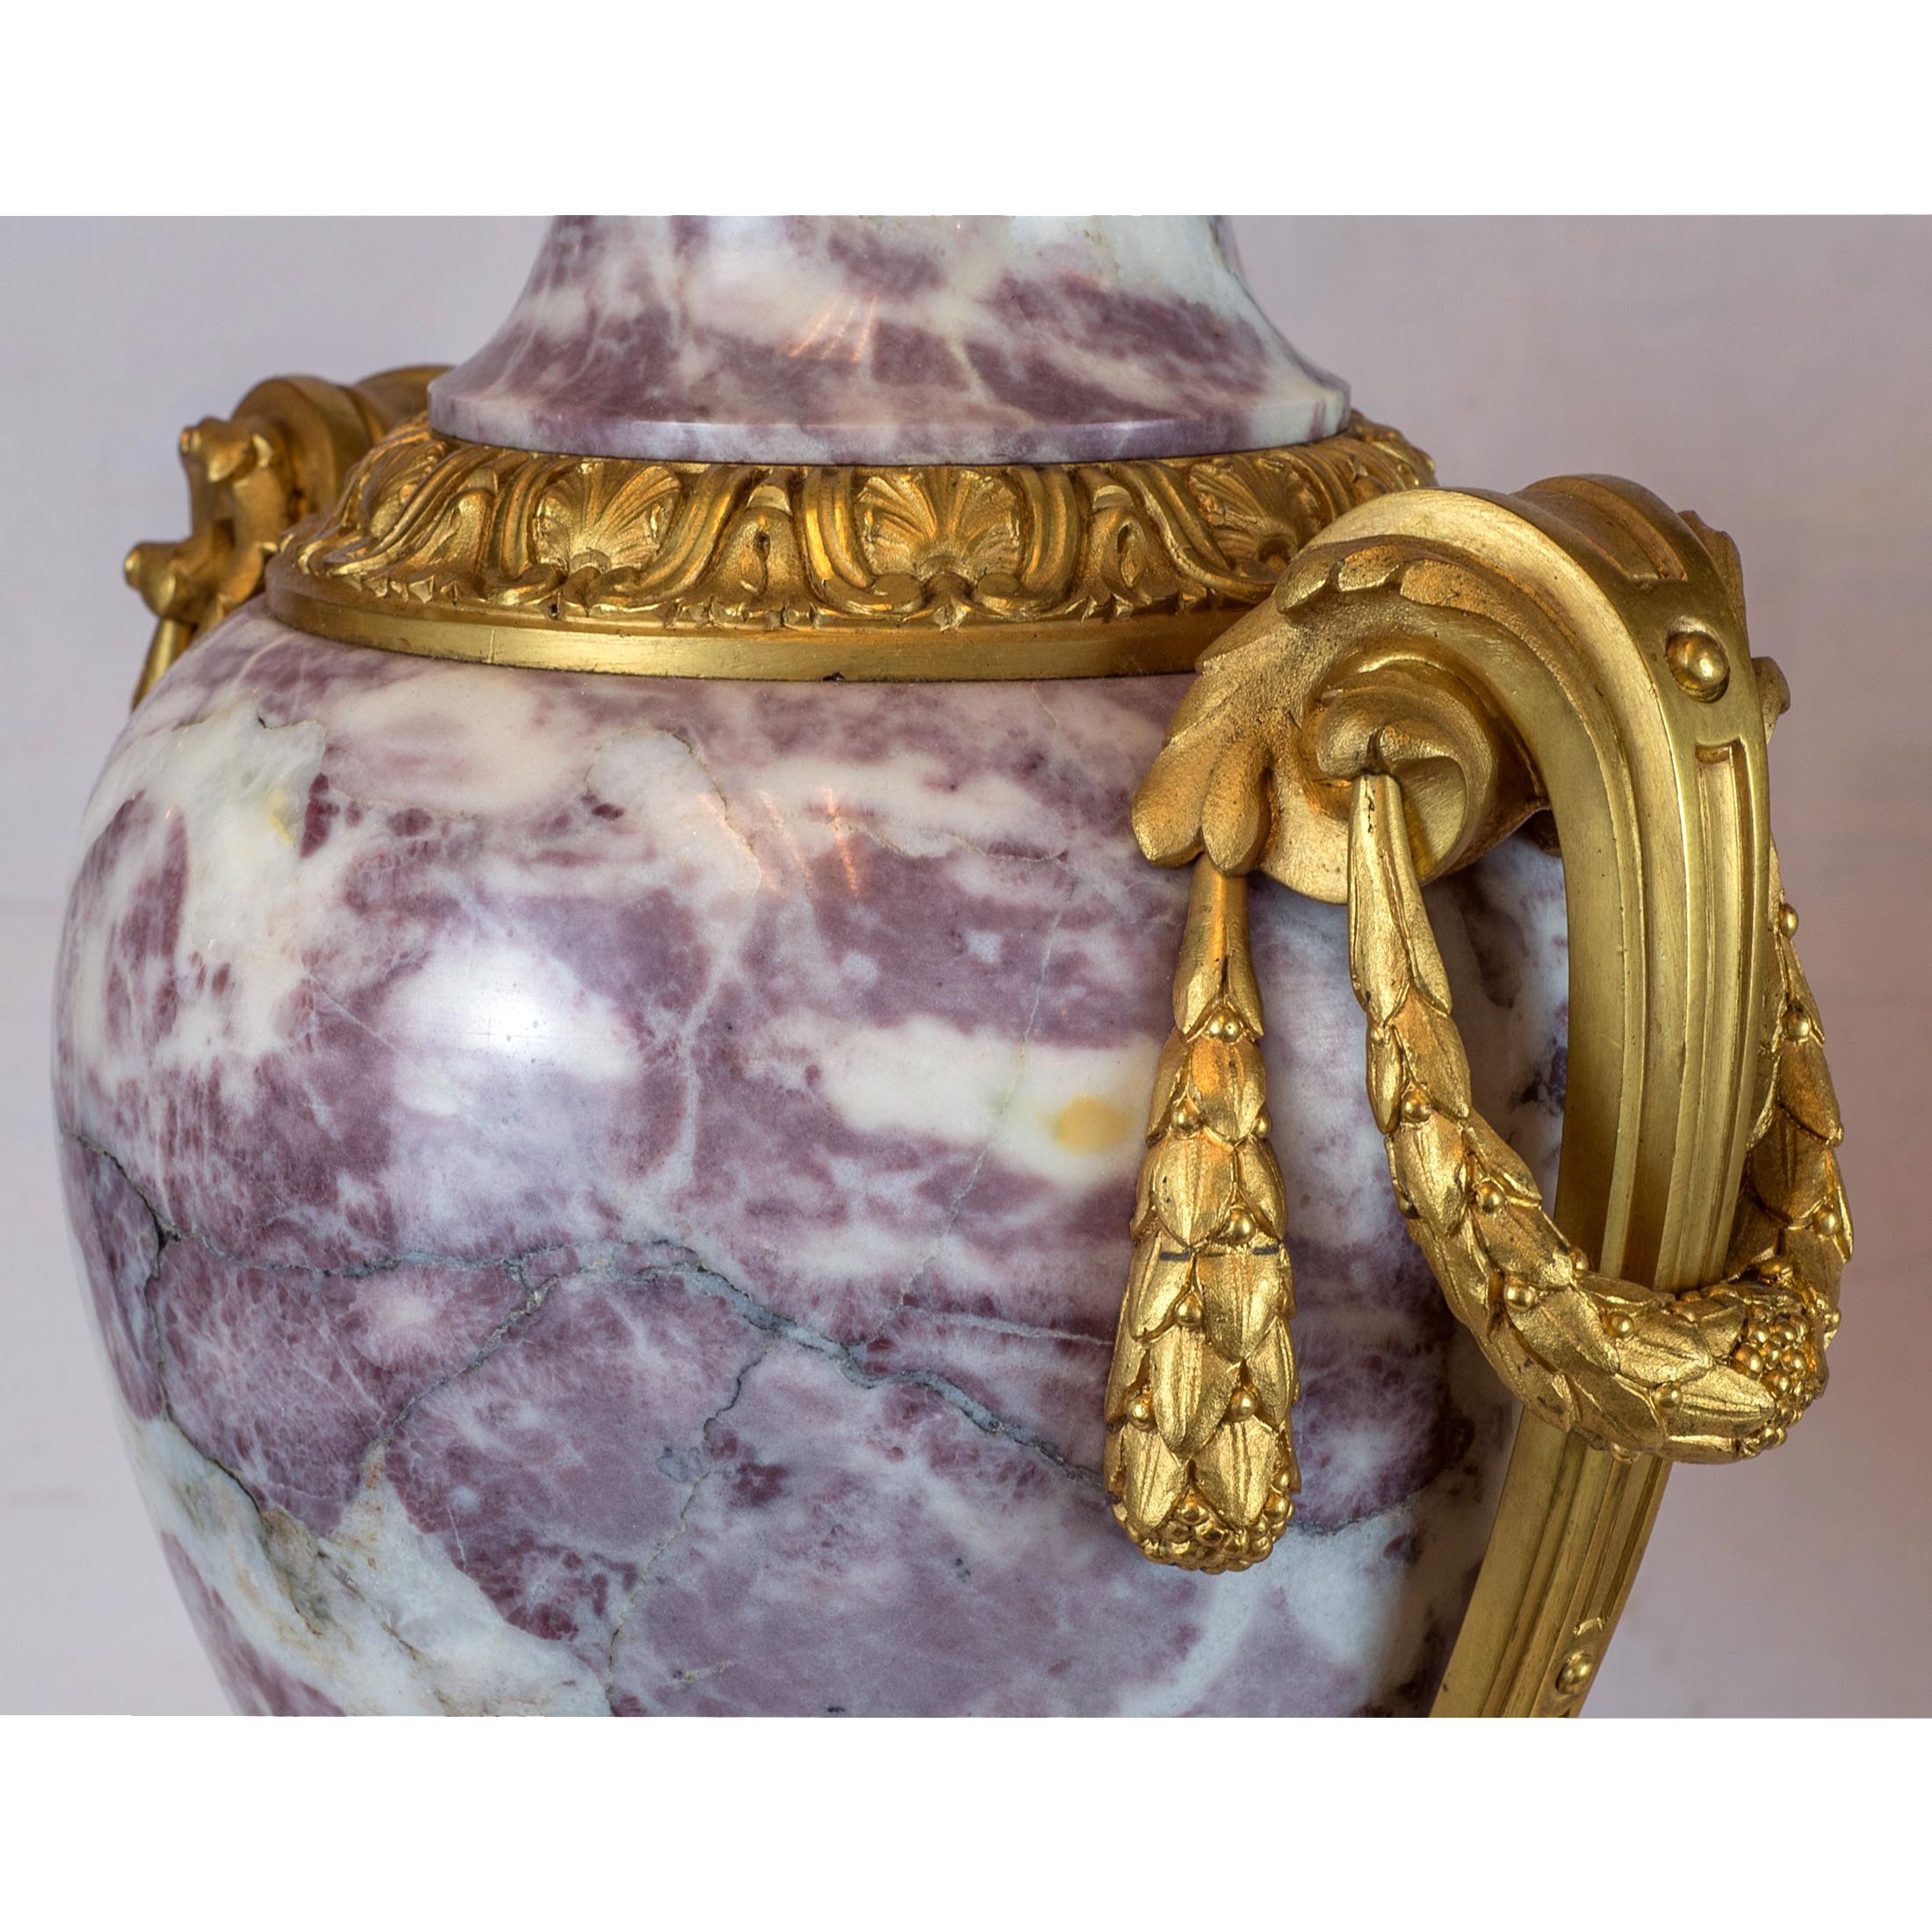 Baroque Pair of Elegant Ormolu-Mounted Brèche Violette Marble Covered Urns For Sale